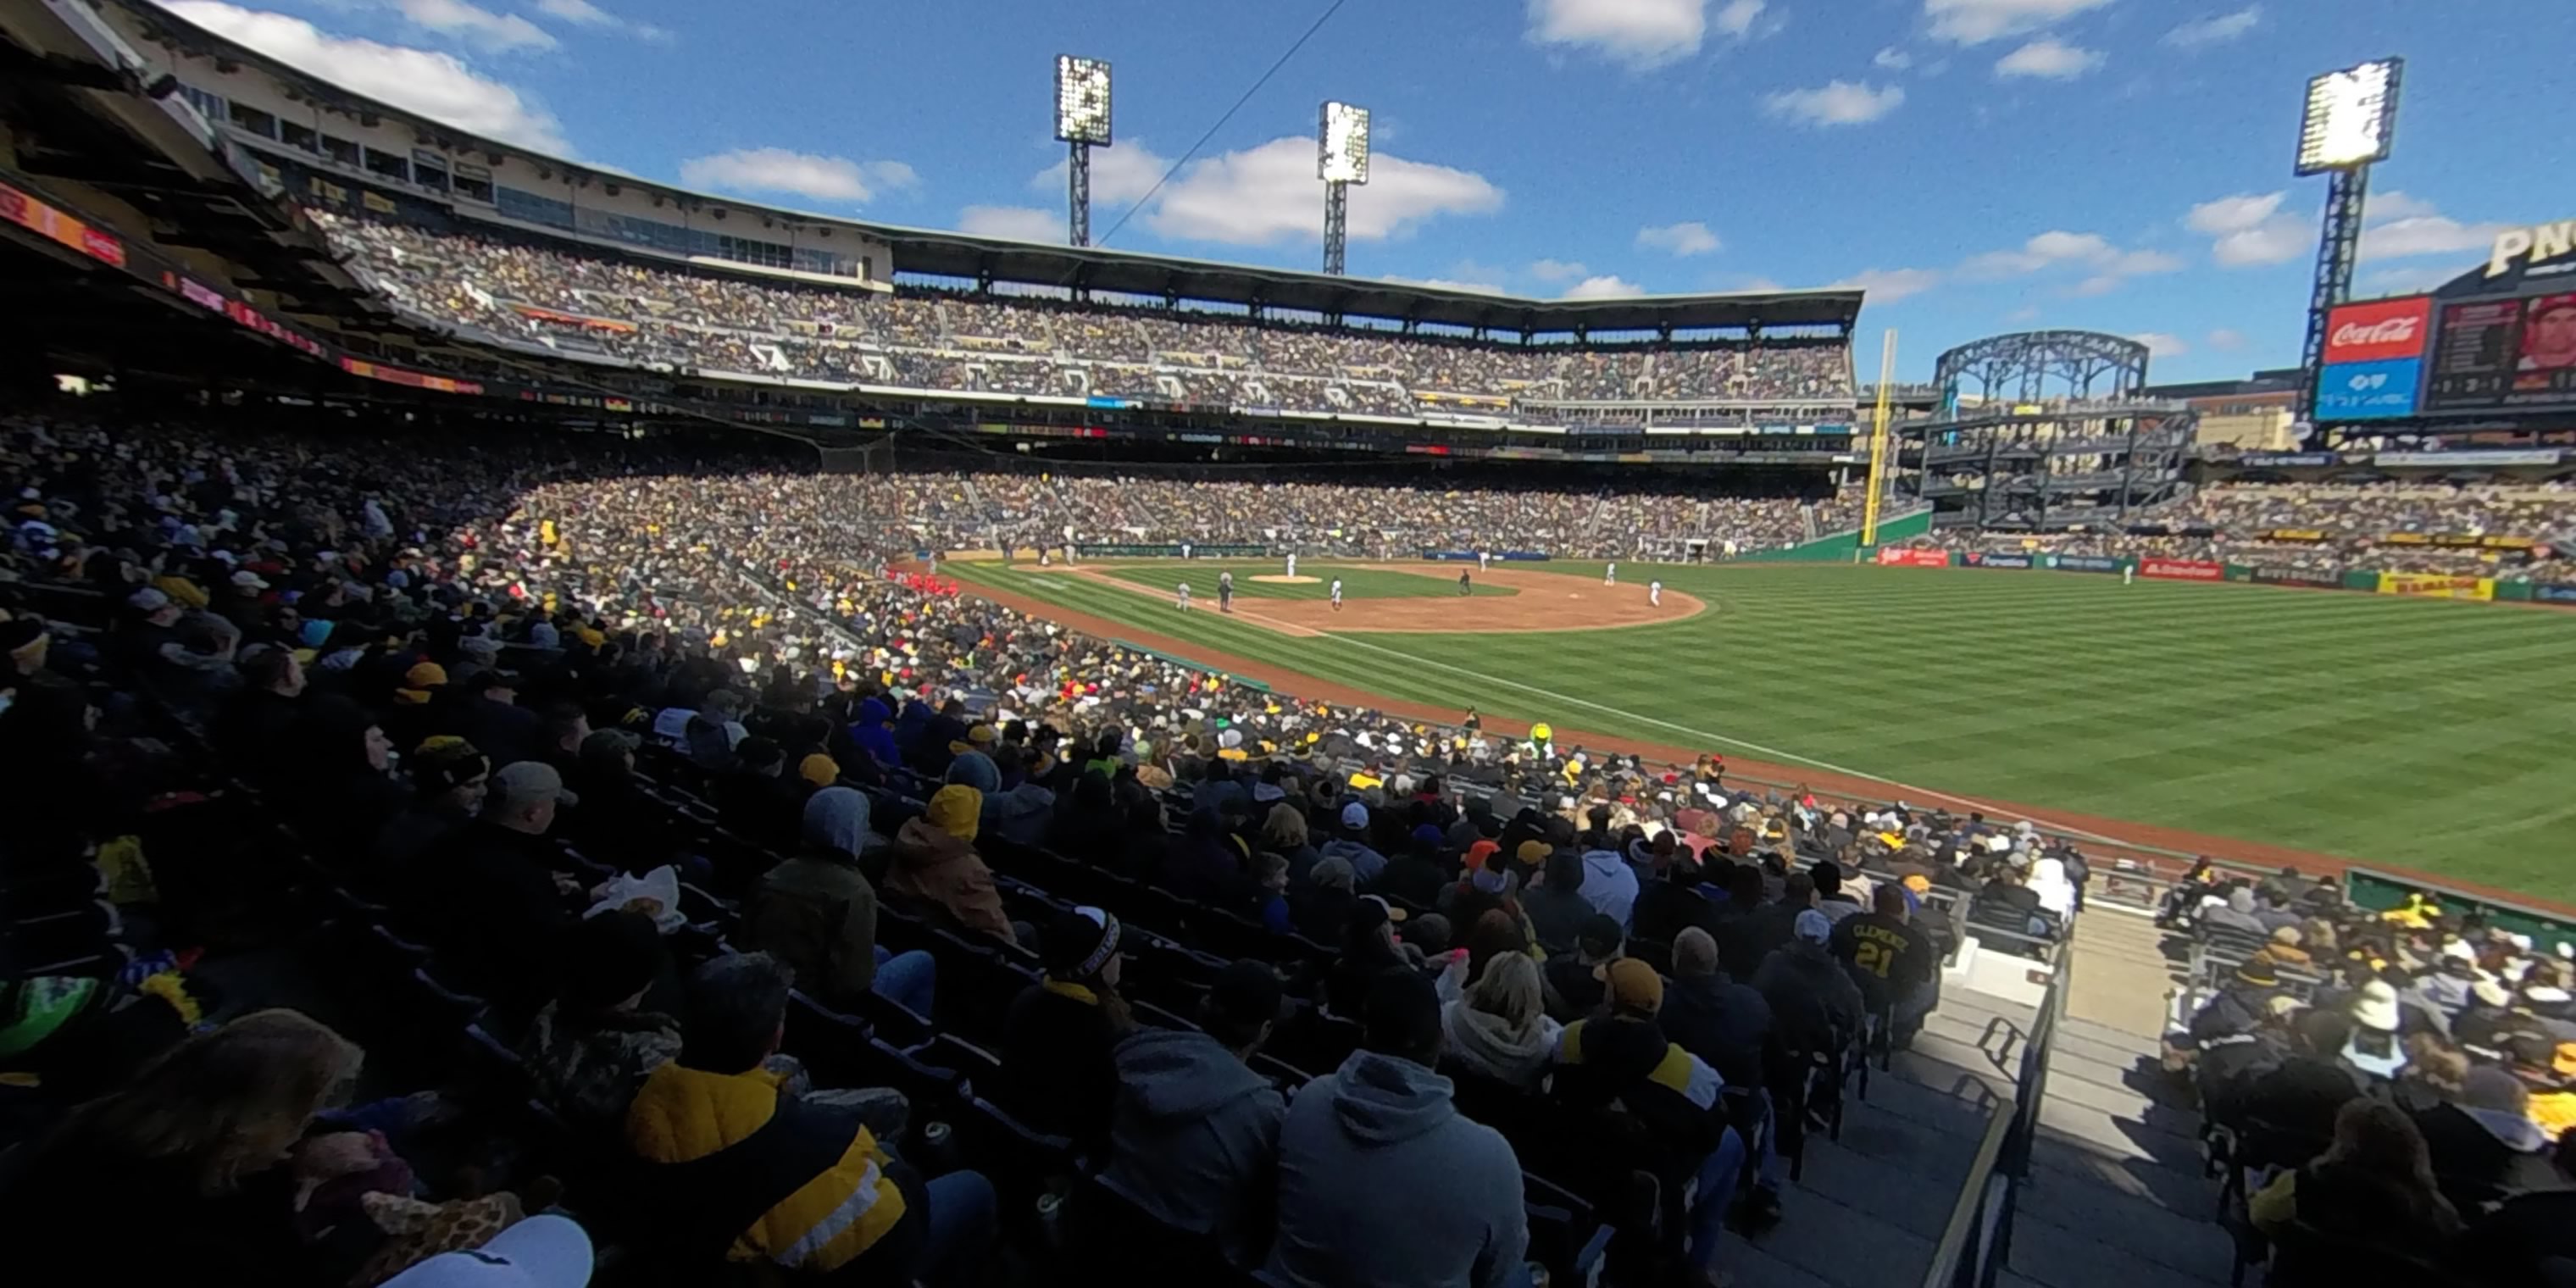 Pin by Eyetique on <3 Pittsburgh  Pnc park, Pittsburgh pirates